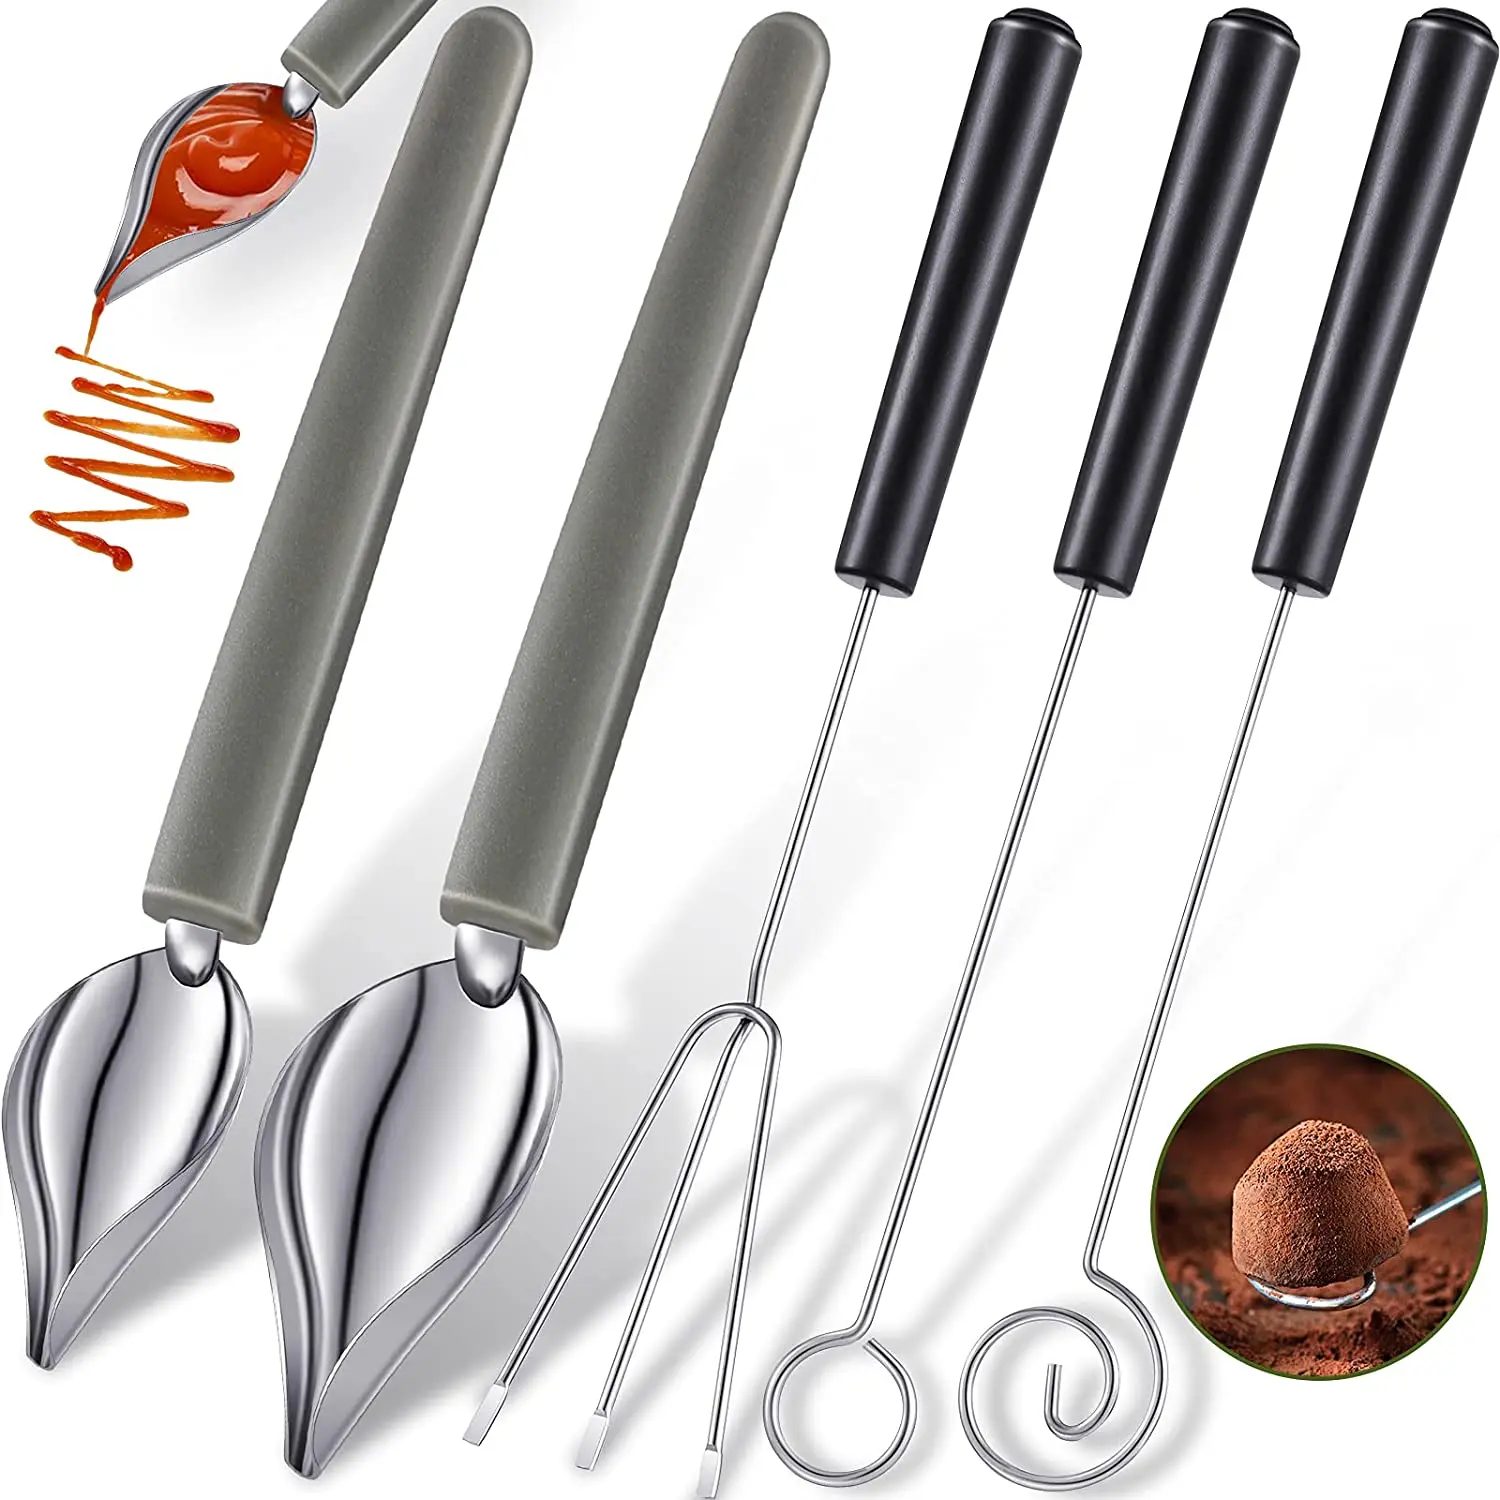 

5pcs Candy Dipping Tools Chocolate Dipping Fork Spoons Set Culinary Decorating Spoons Chef Art Pencil For Decorative Plates